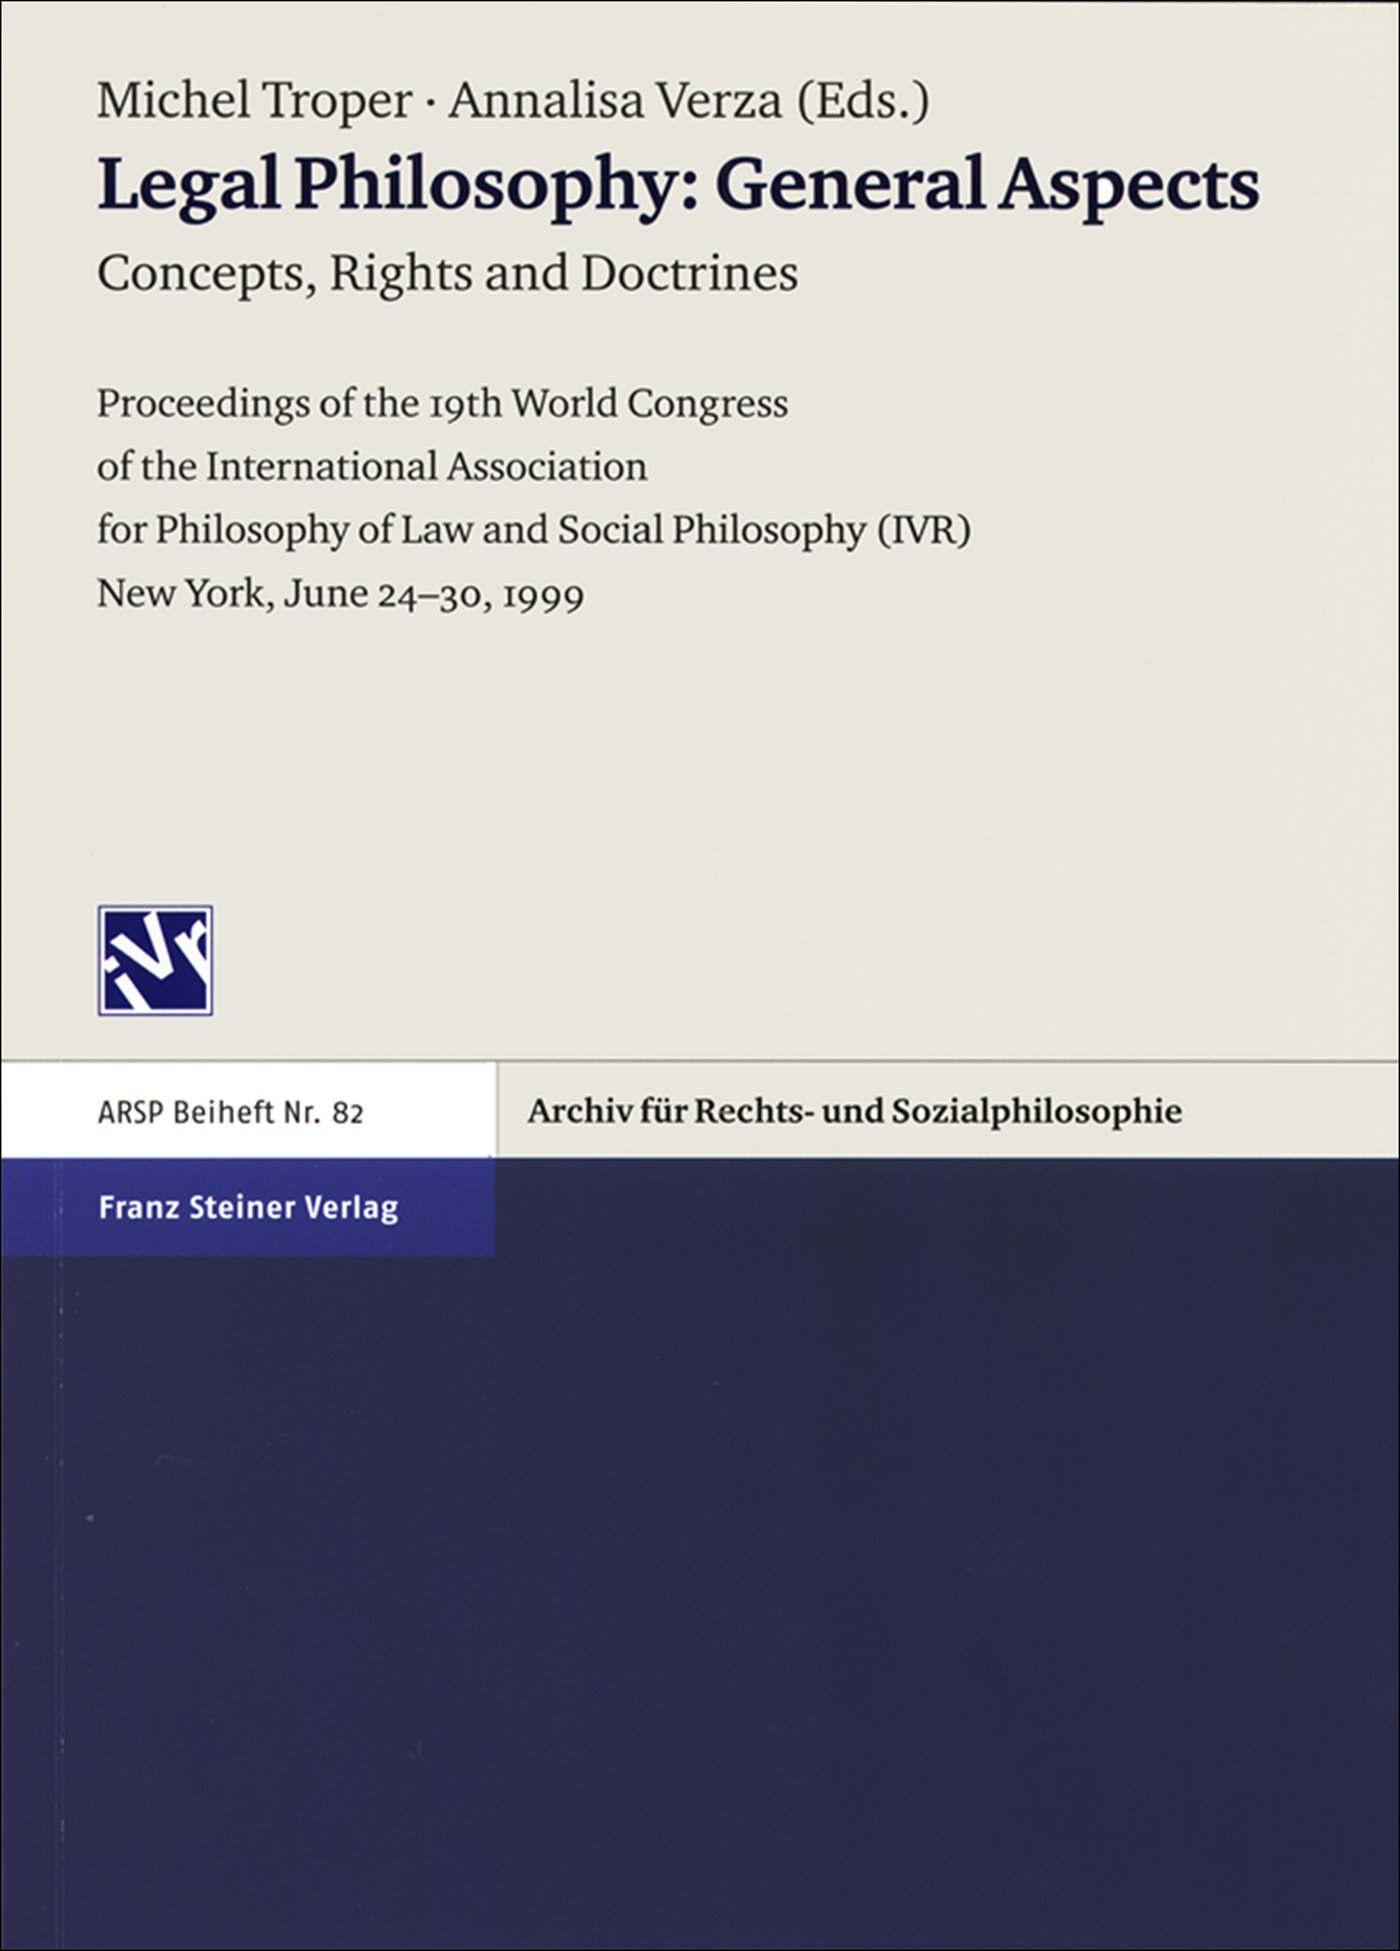 Legal Philosophy – General Aspects. Vol. 1: Concepts, Rights and Doctrines